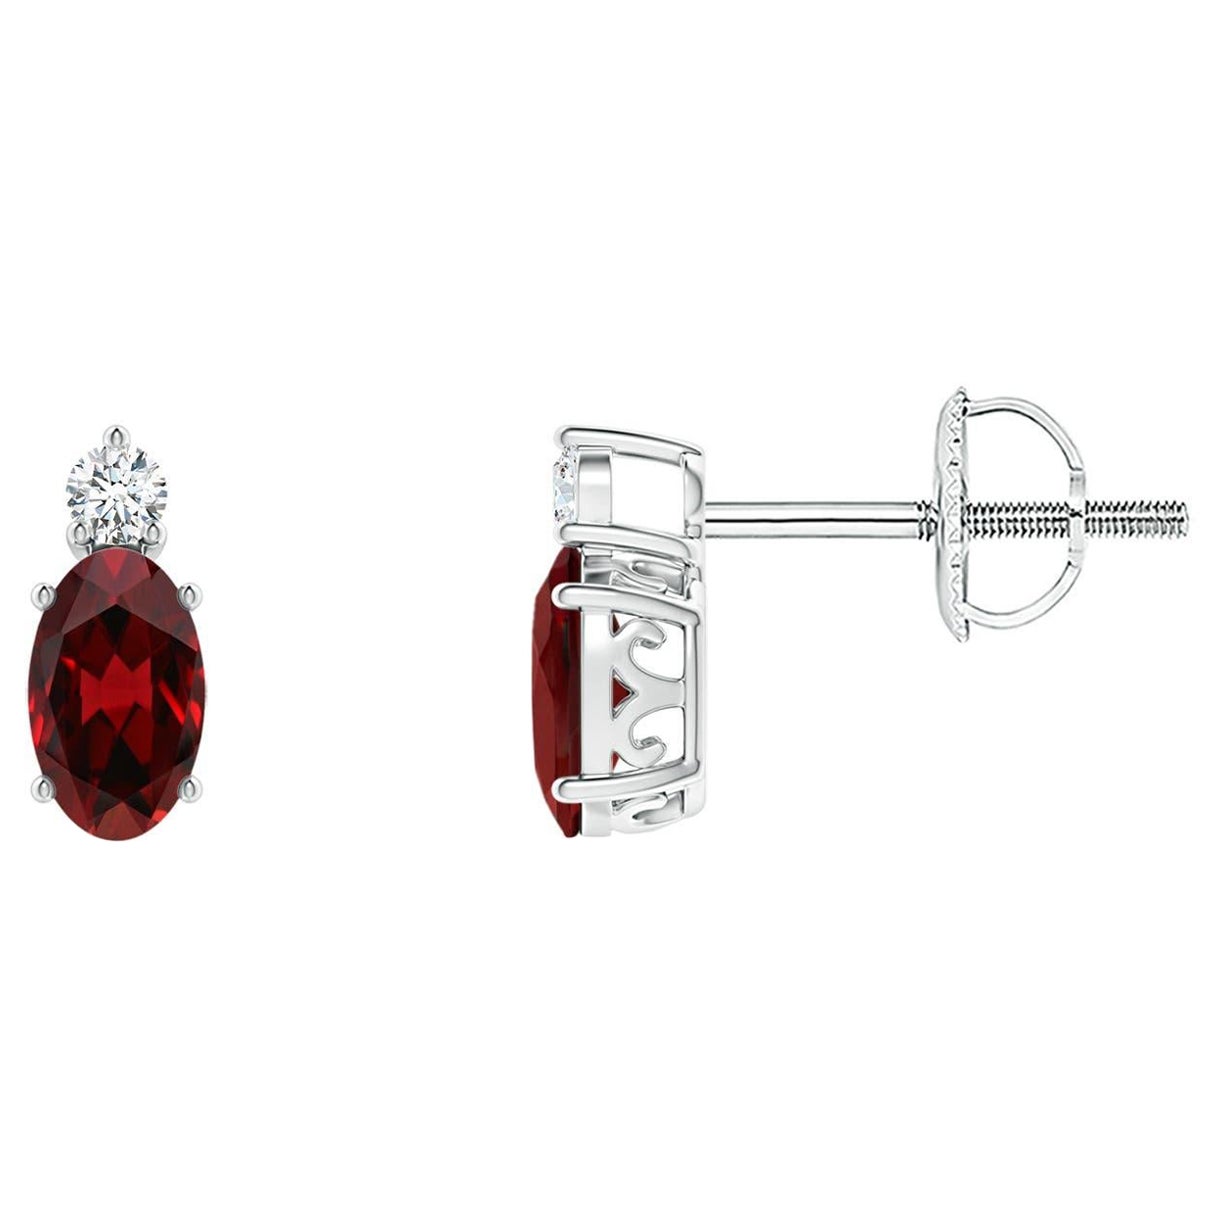 Natural Oval 0.50ct Garnet Stud Earrings with Diamond in 14K White Gold